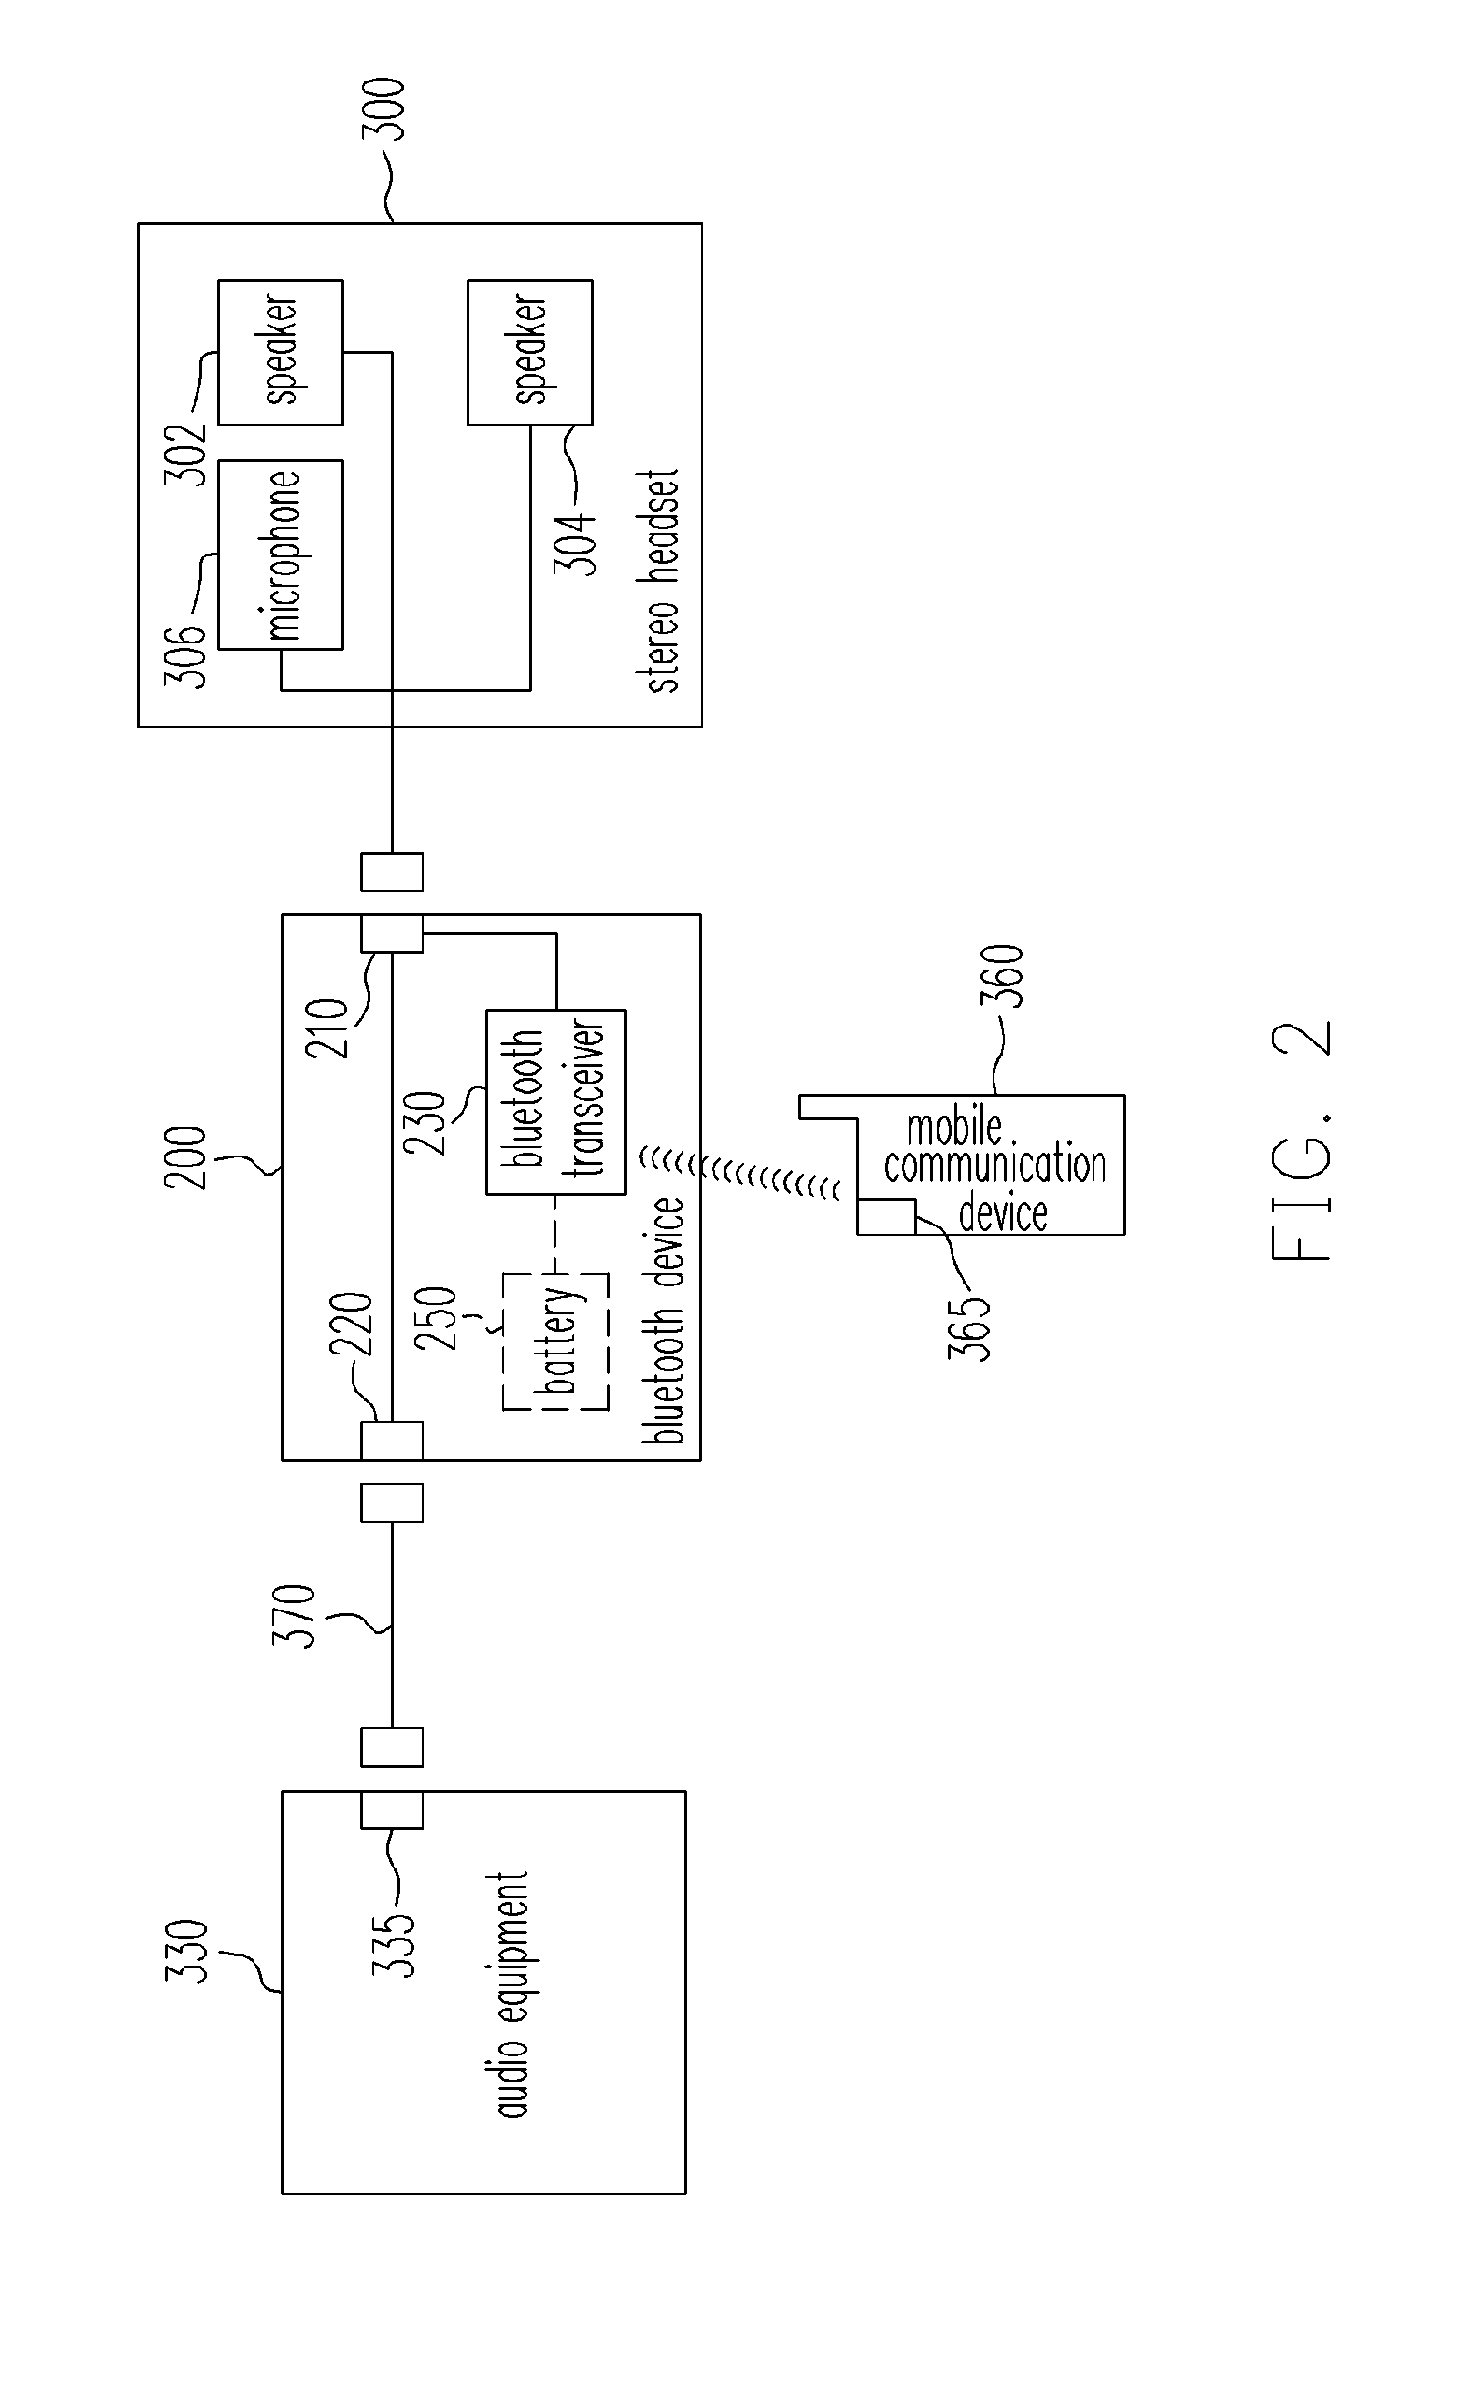 Bluetooth headset and bluetooth device connectable to audio equipment